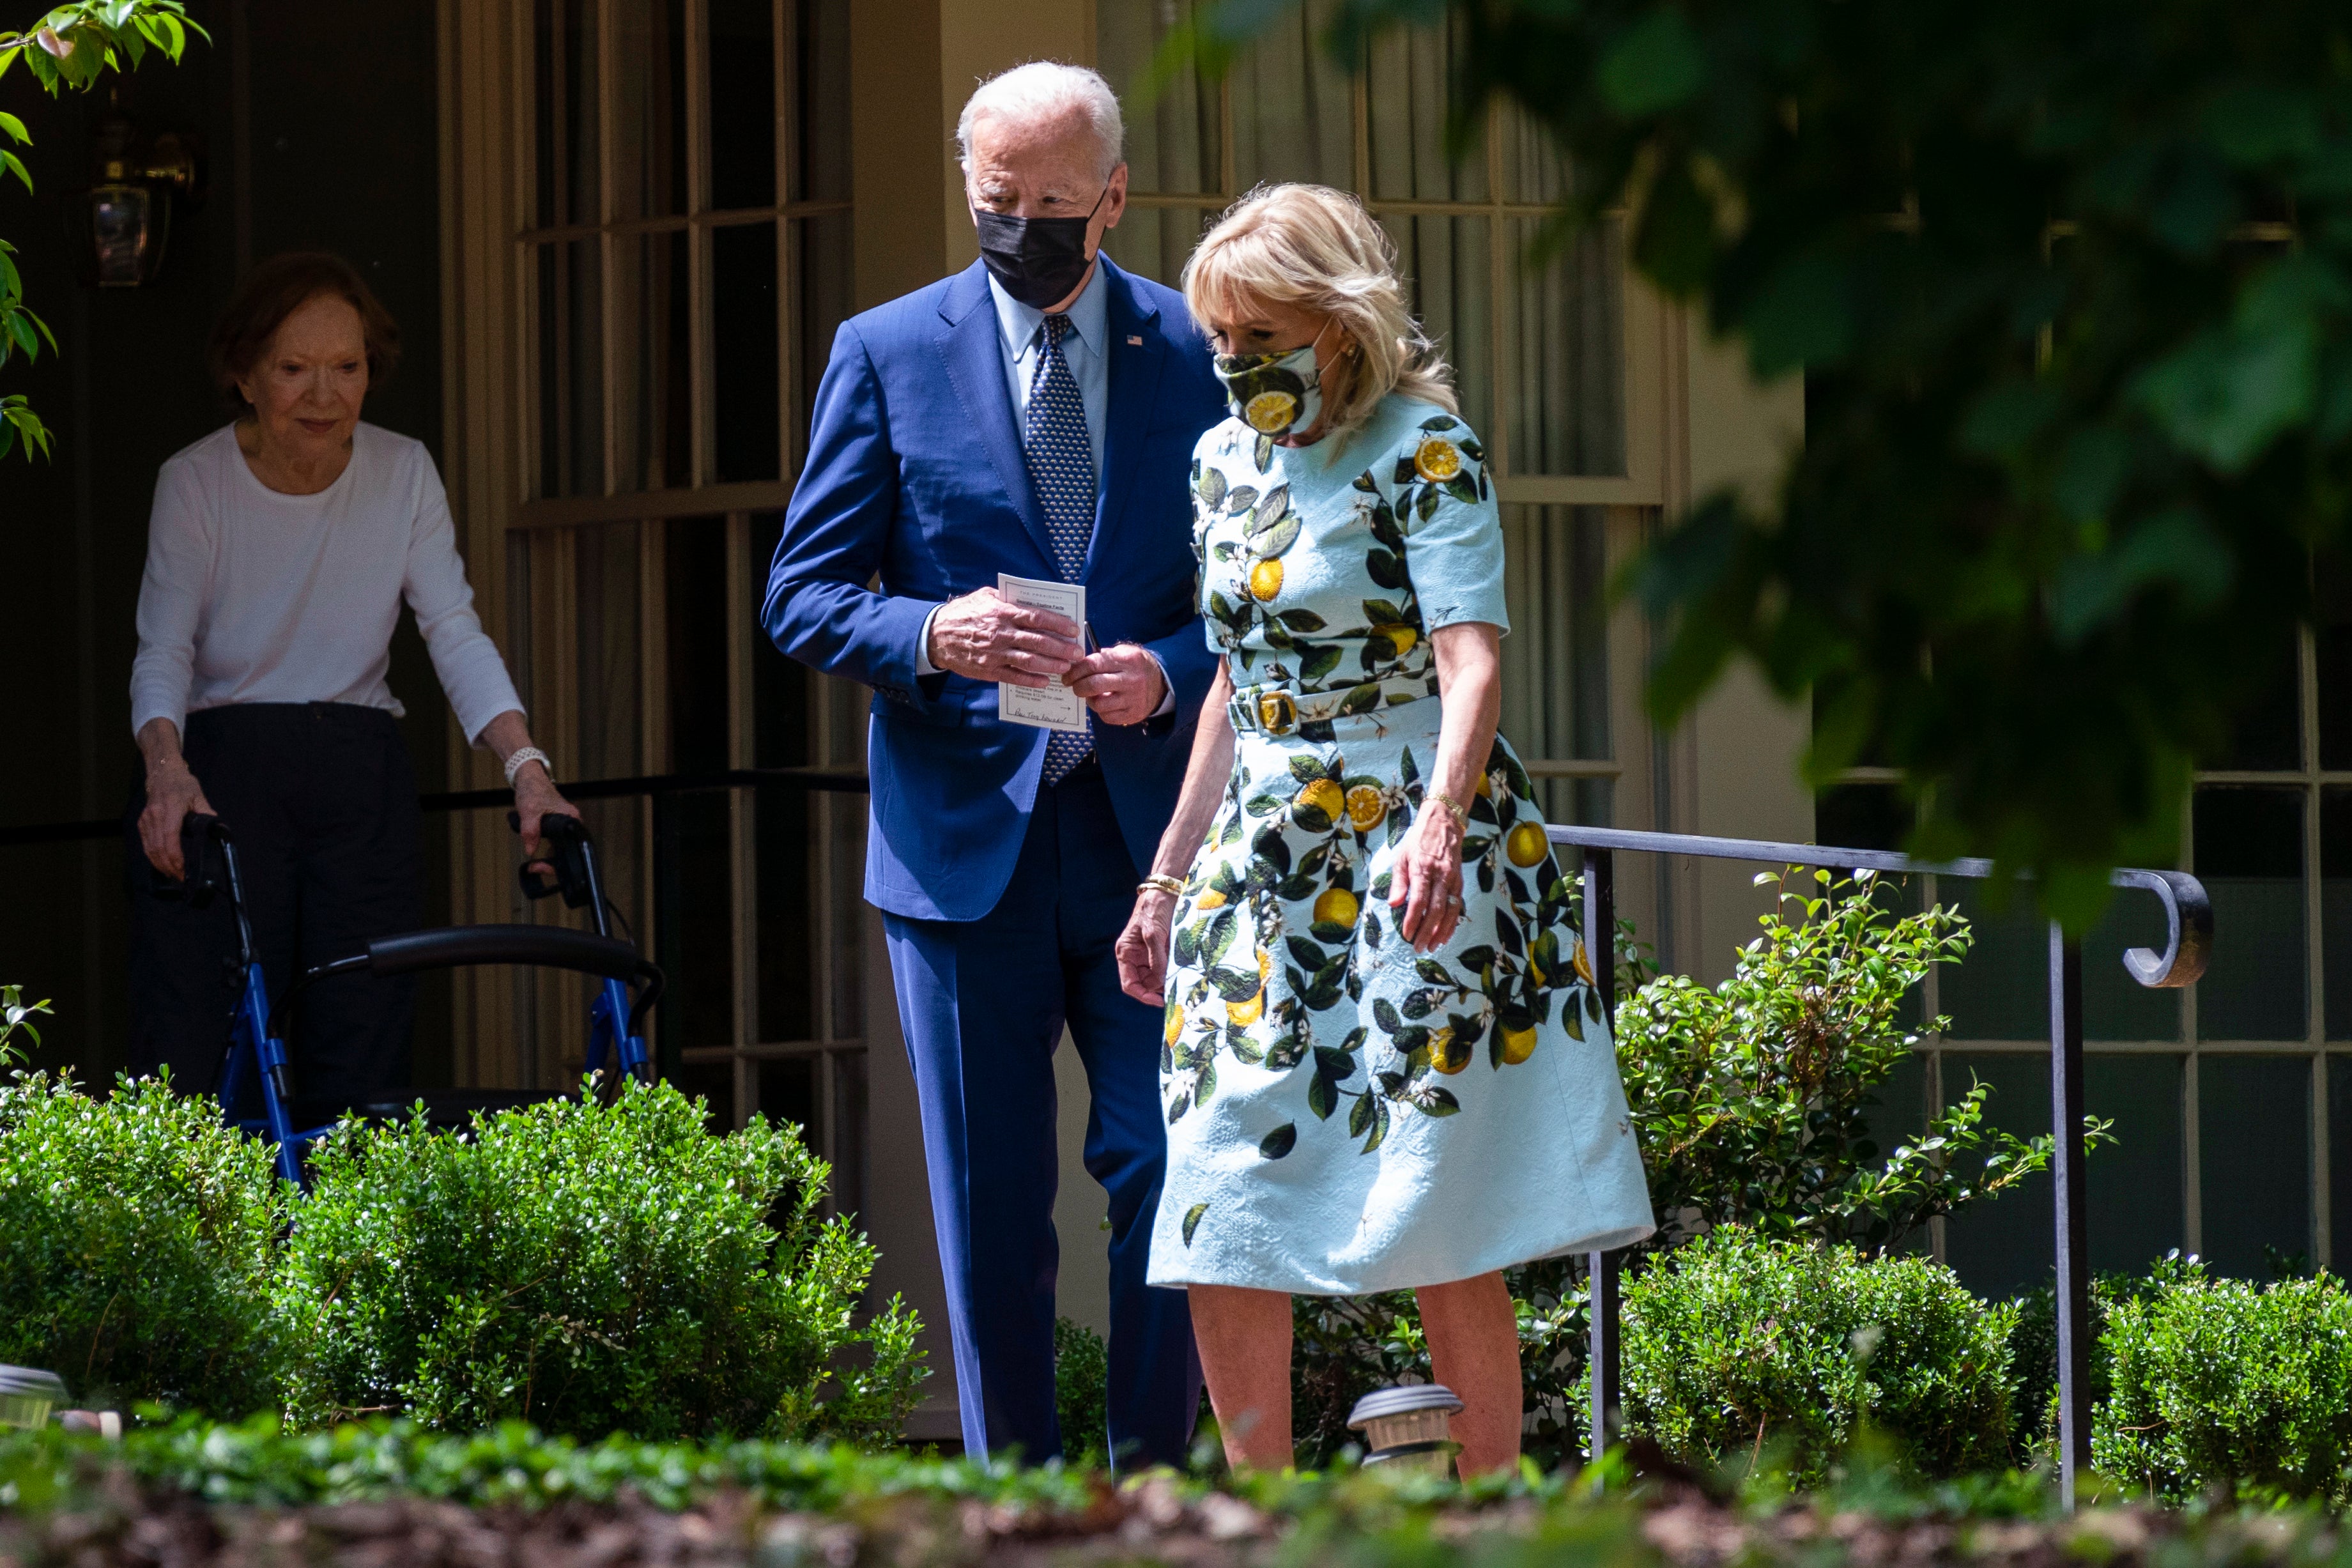 Joe and Jill Biden leave the home of Jimmy and Rosalynn Carter in Plains, Georgia on 29 April.